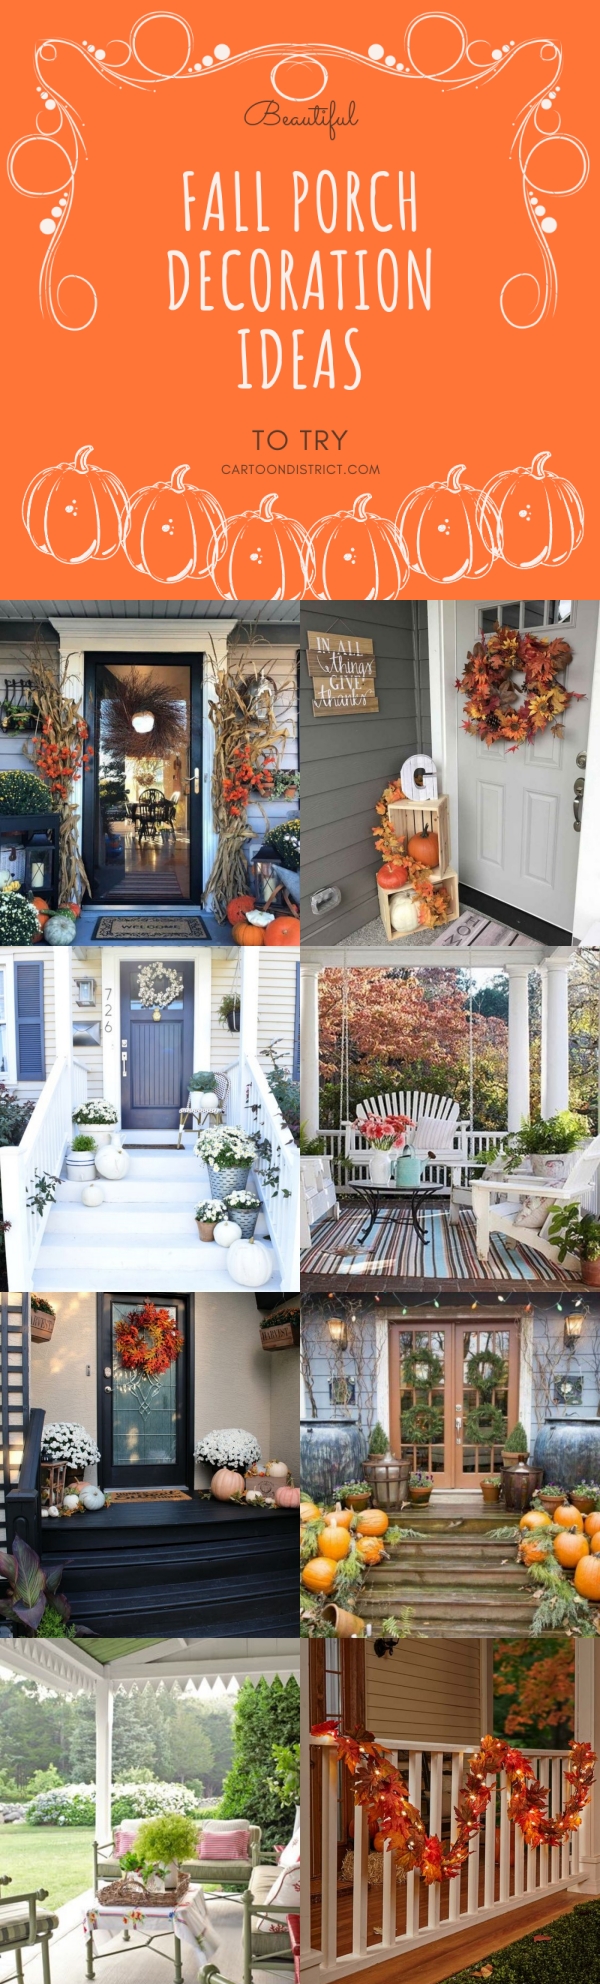  Beautiful-Fall-Porch-Decoration-Ideas-to-Try